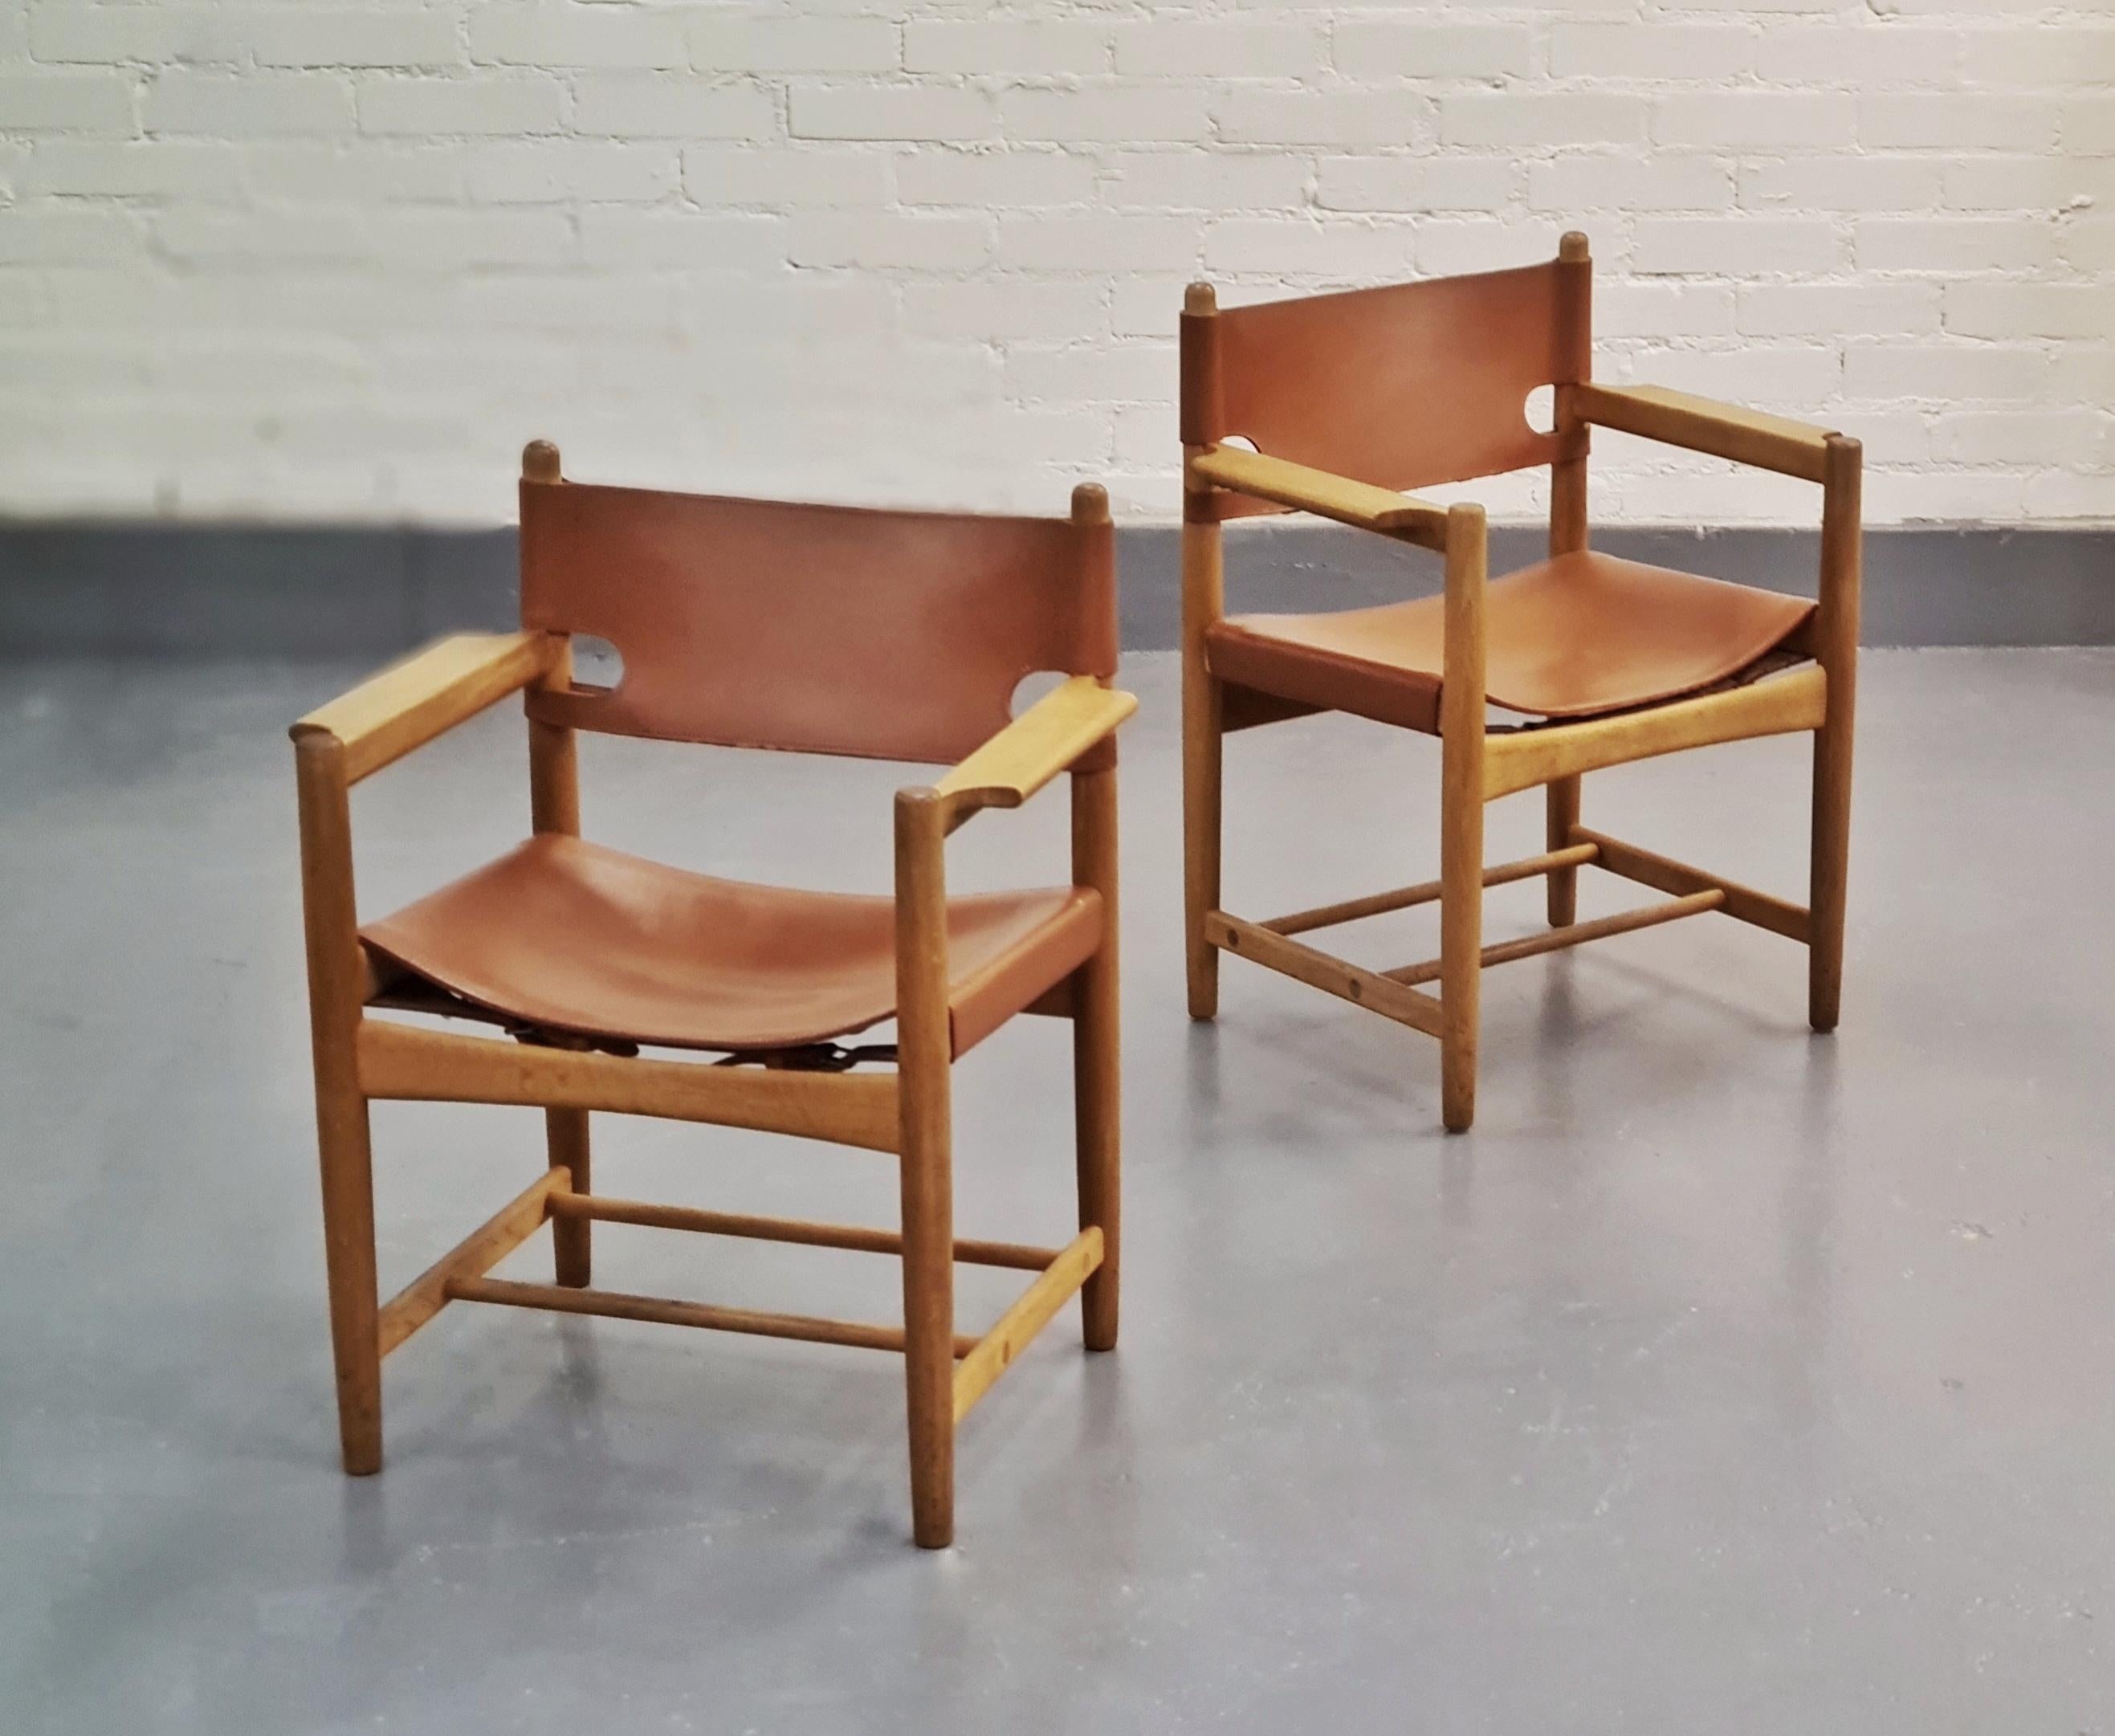 Borge Mogensen began his career as a cabinetmaker, then studied furniture design at the school of Arts and Crafts in Copenhagen until 1938, under the direction of Kaare Klint, where he later became assistant between 1938 and 1941. Mogesen`s works